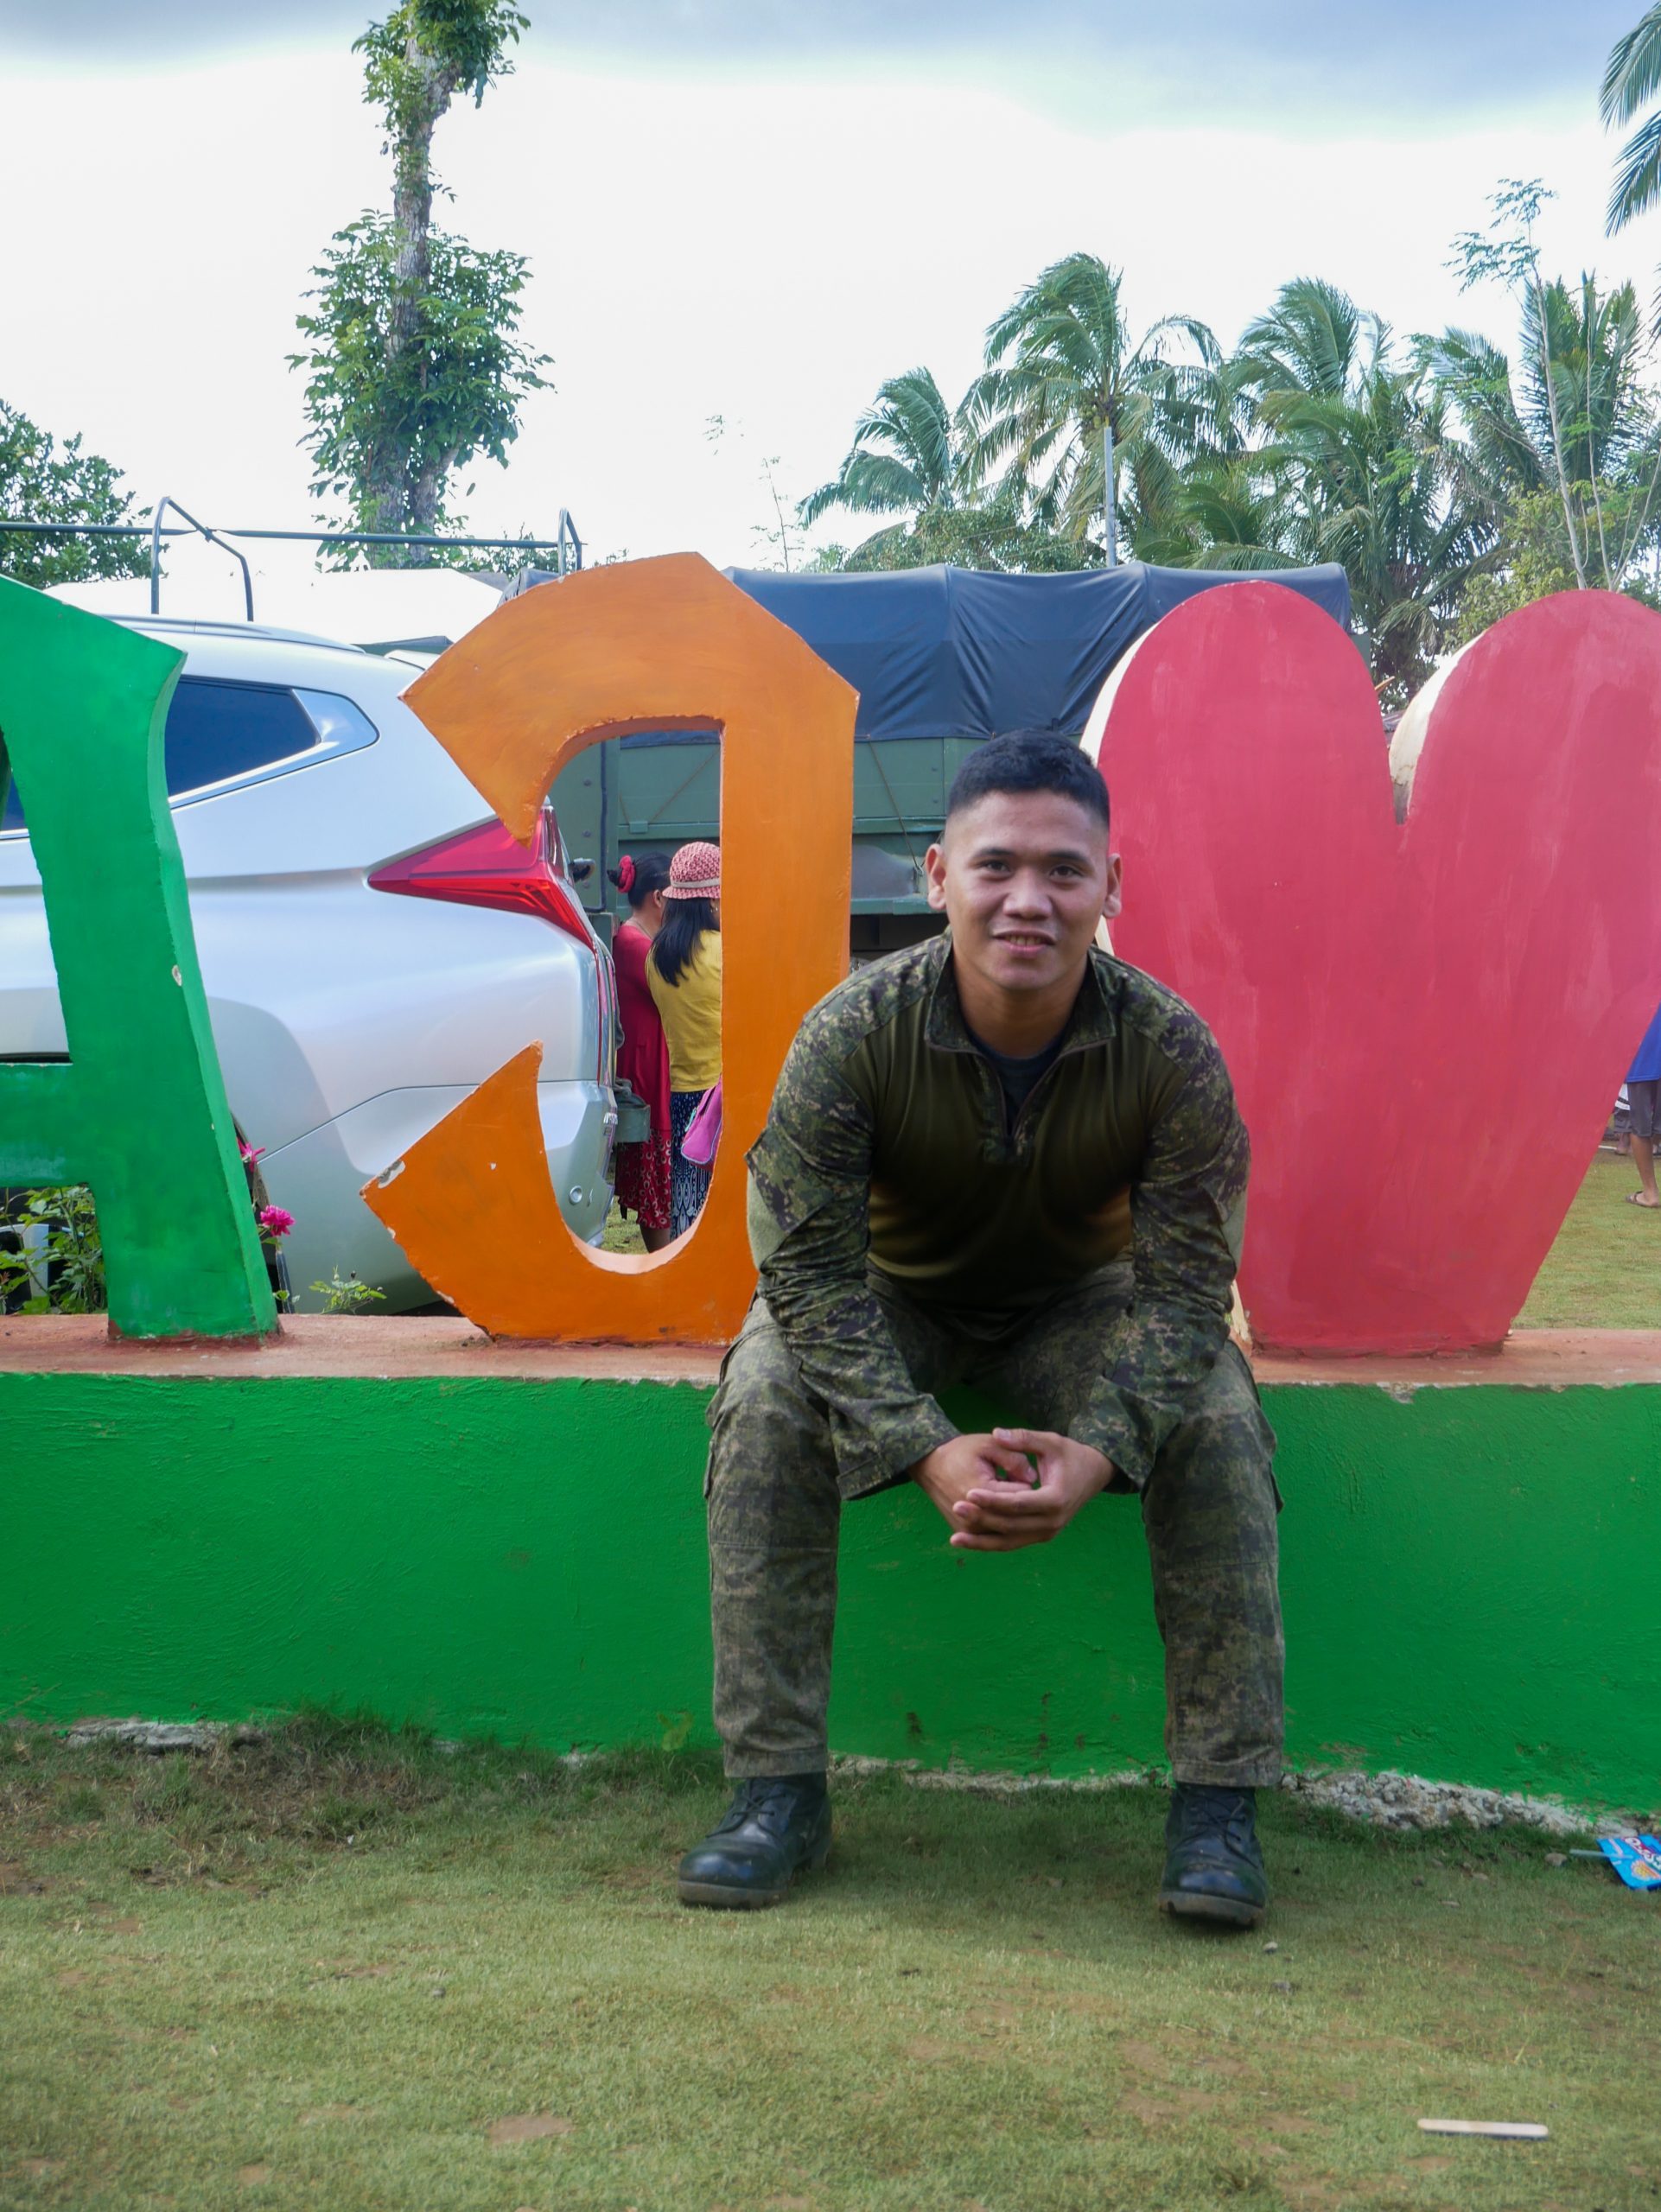 Continuing the service to the Filipino people: Lt. Adesas is back at volunteering for OB, now an Army Officer